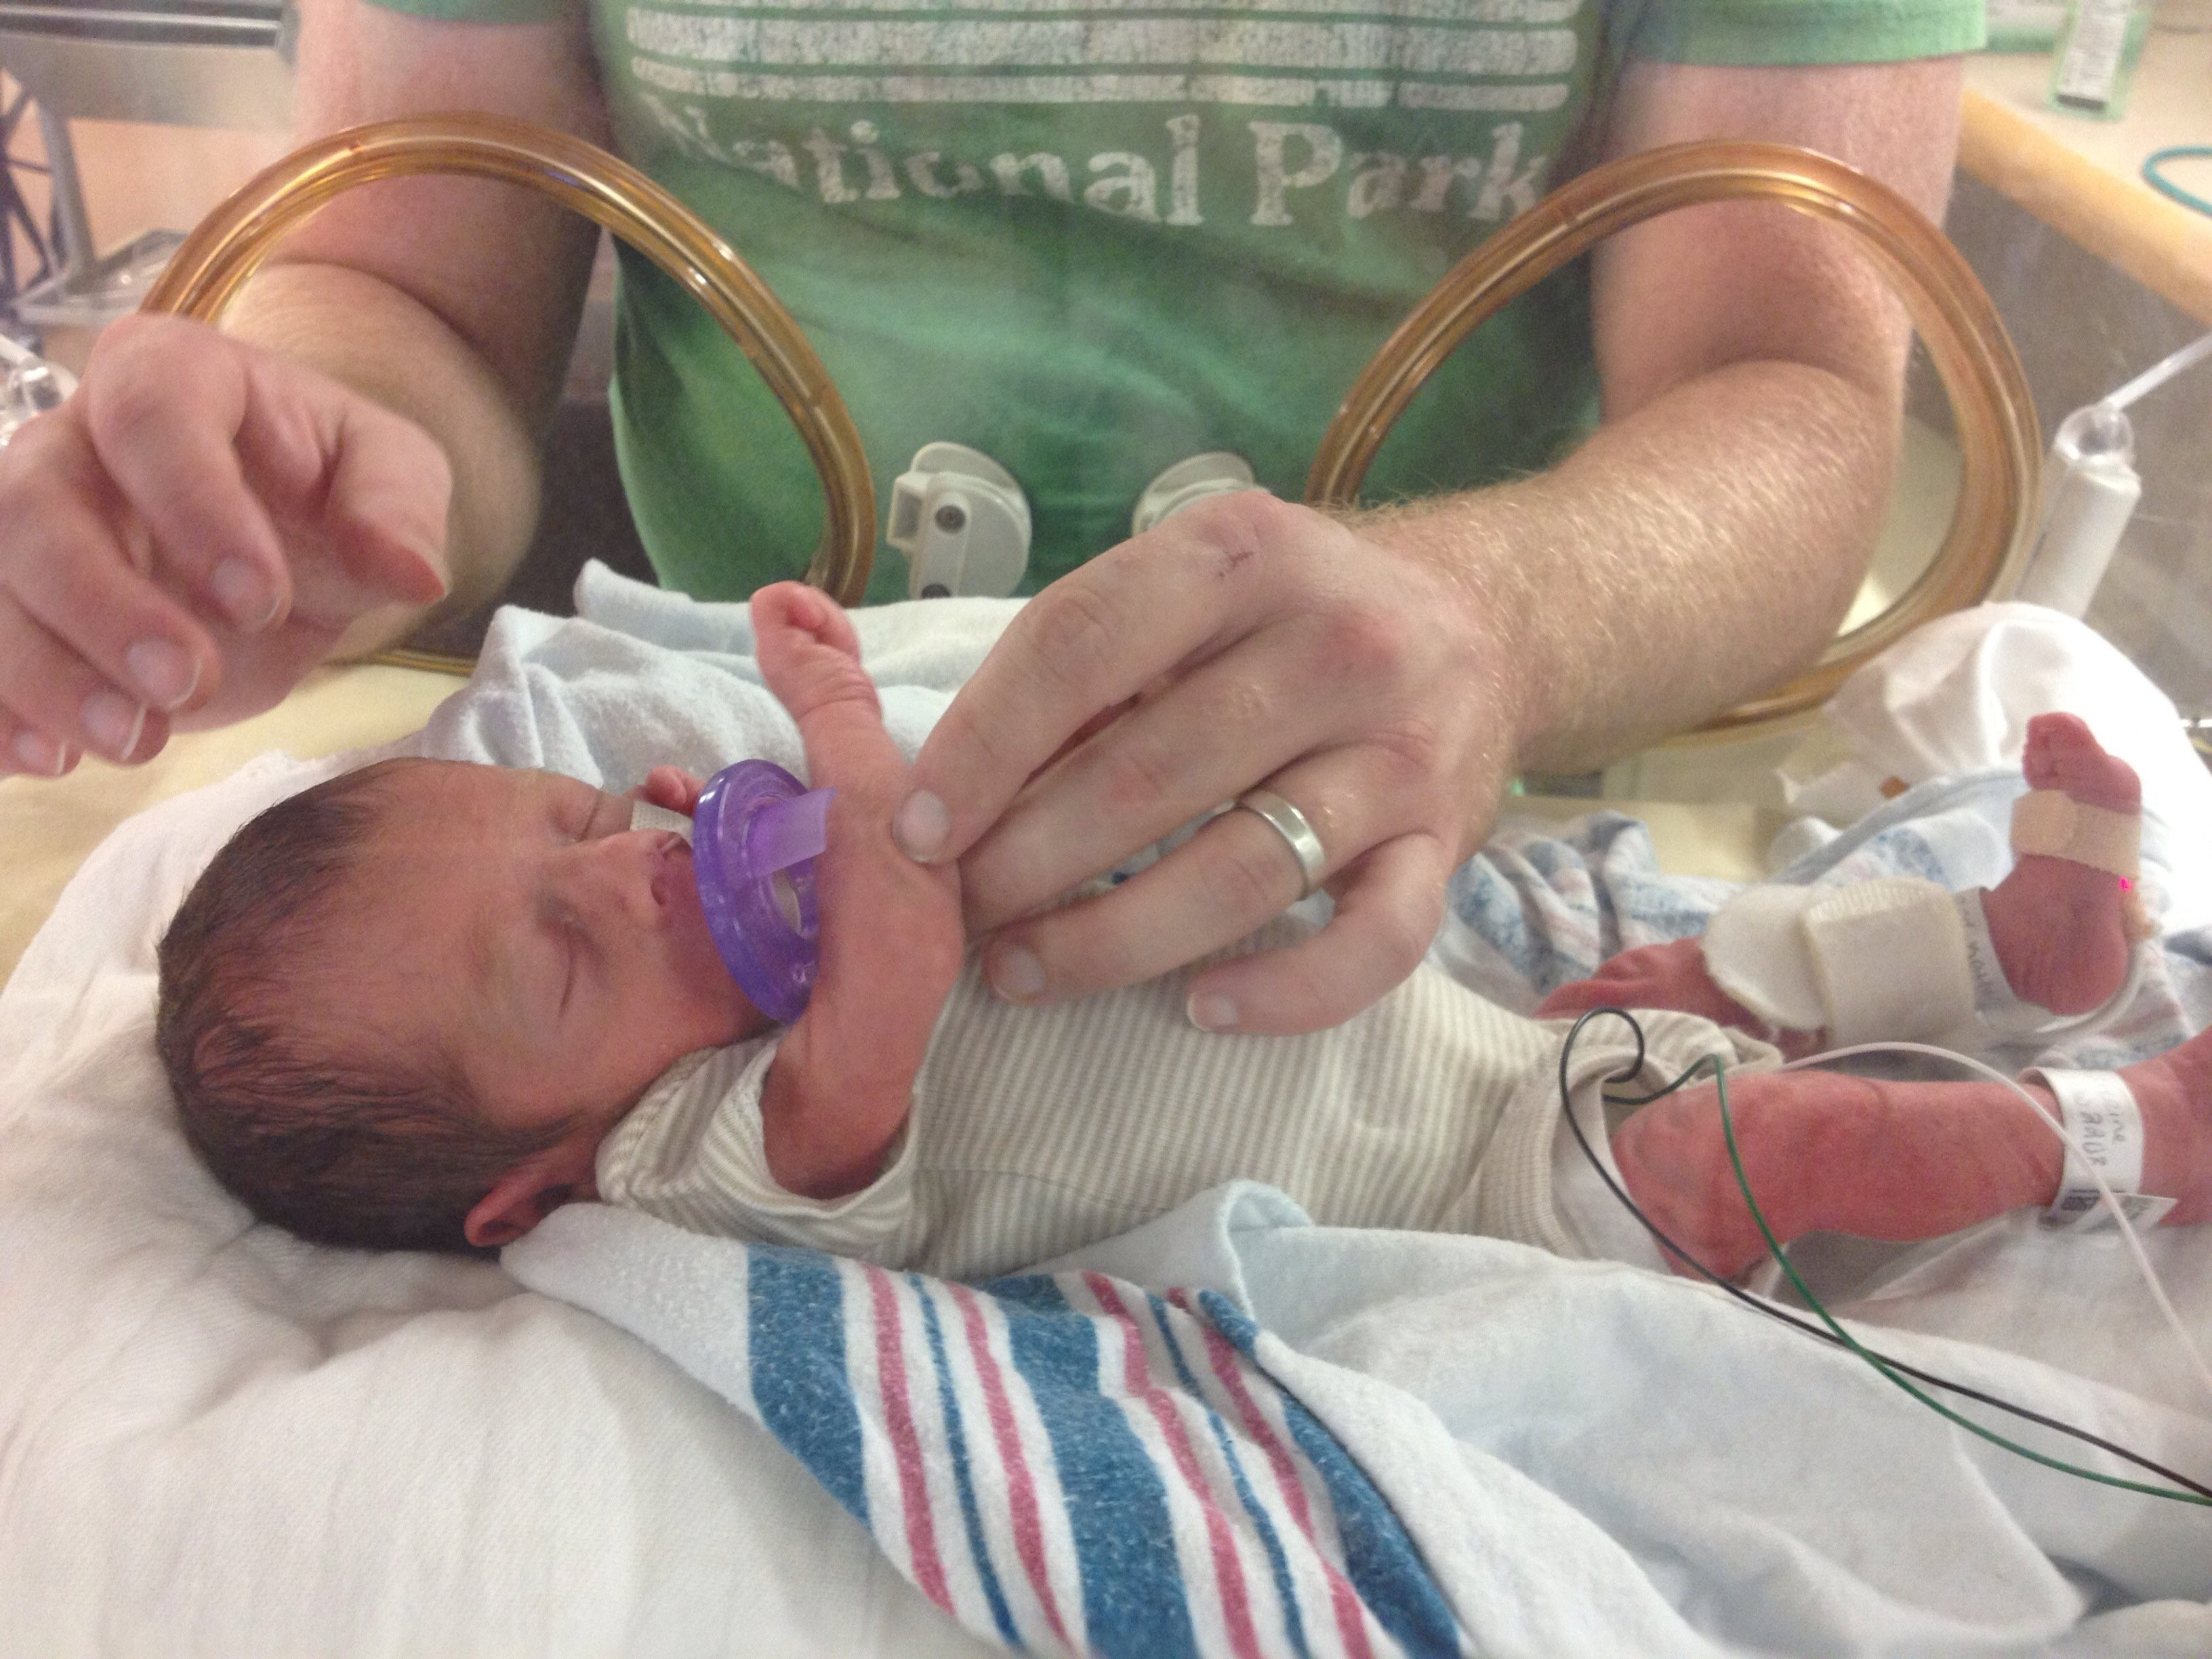 An adult male wearing a green shirt is tending a premature baby in the NICU.